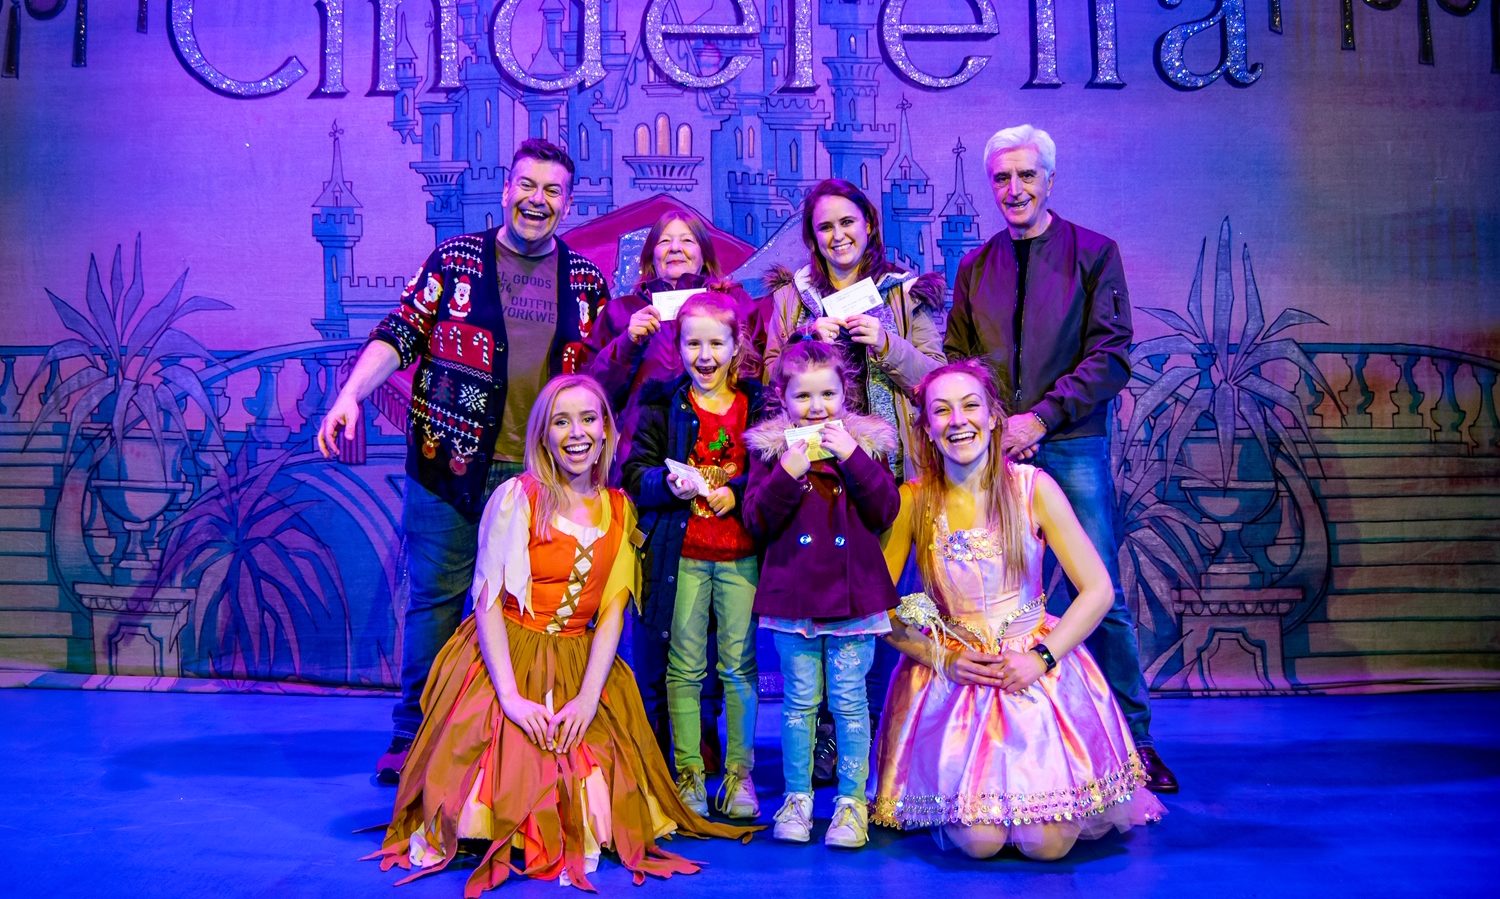 Back row (left to right): Tom Urie (Ugly Sister), Patricia Phinn (Phoenix group), Terrie Bustard
(Parent) and Tony Cochrane (owner of Club Tropicana/Fat Sams). Front row: Jenny Douglas (Cinderella), Lillian Jackson, Page Jackson and Naomi Stirrat (Fairy Godmother).